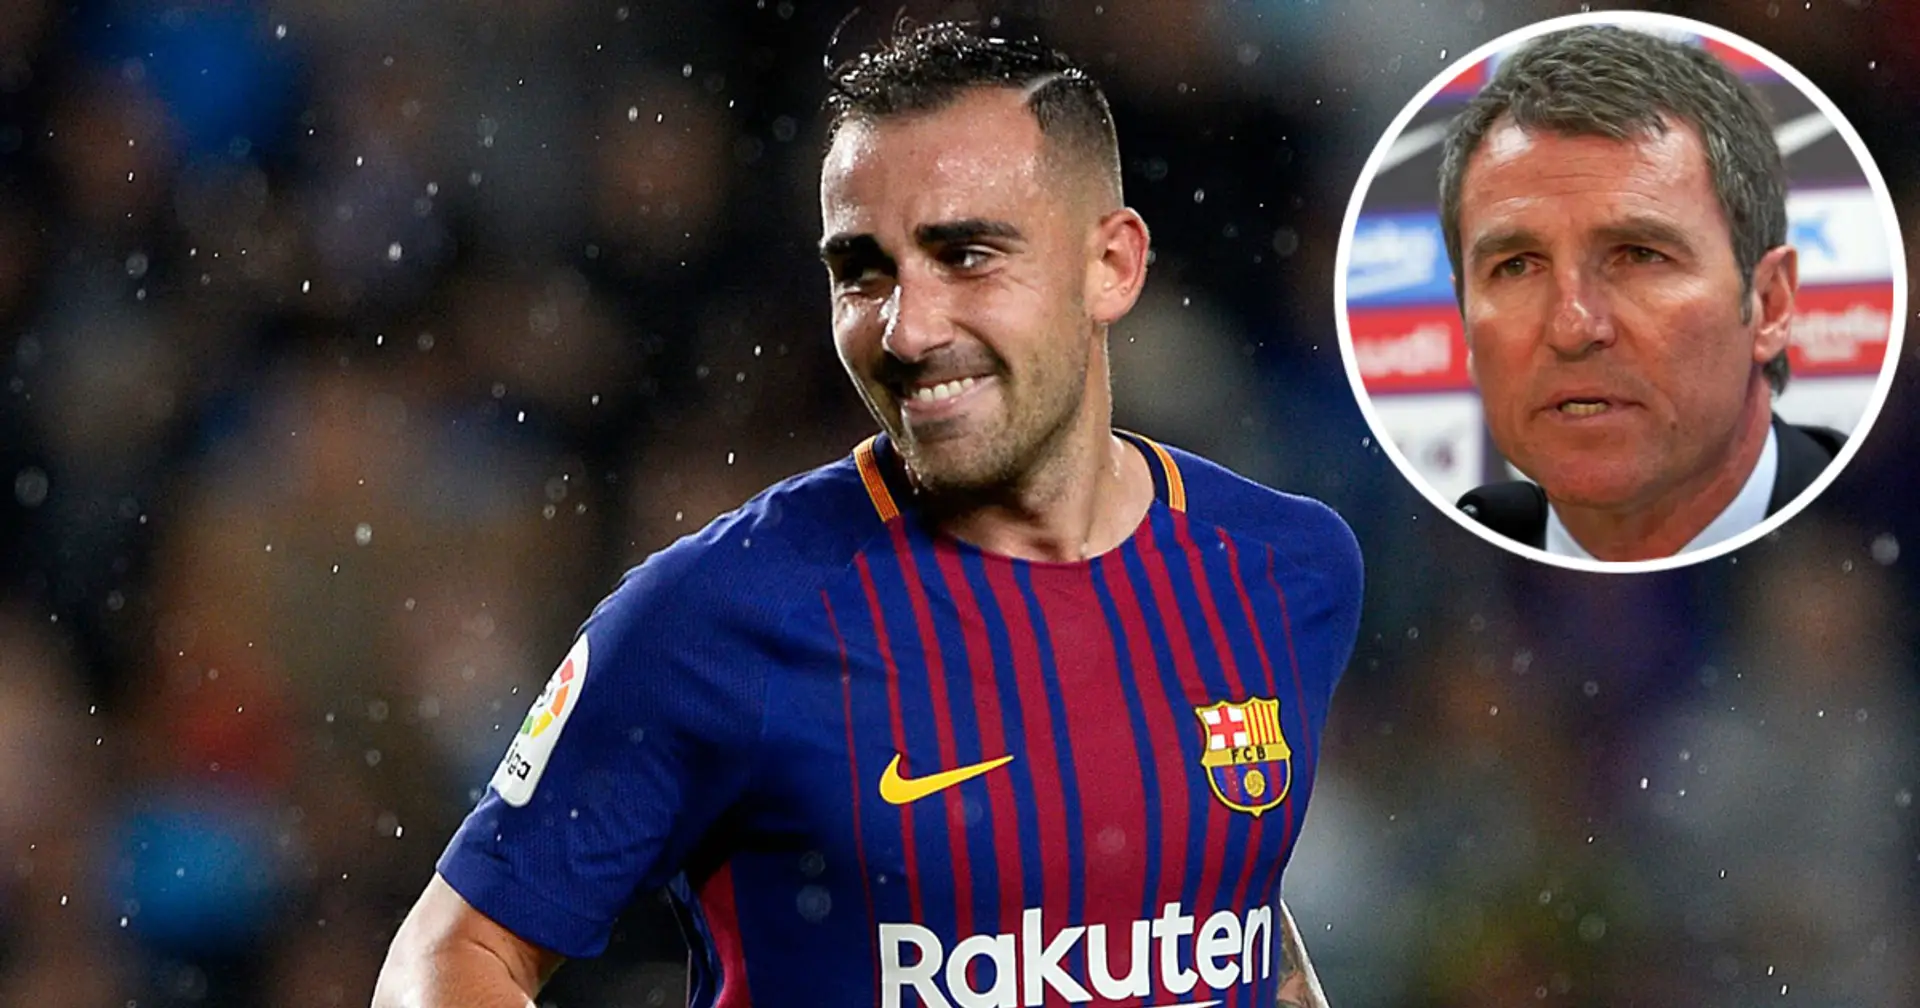 'He wanted to come here': Robert Fernandez explains the signing of Paco Alcacer